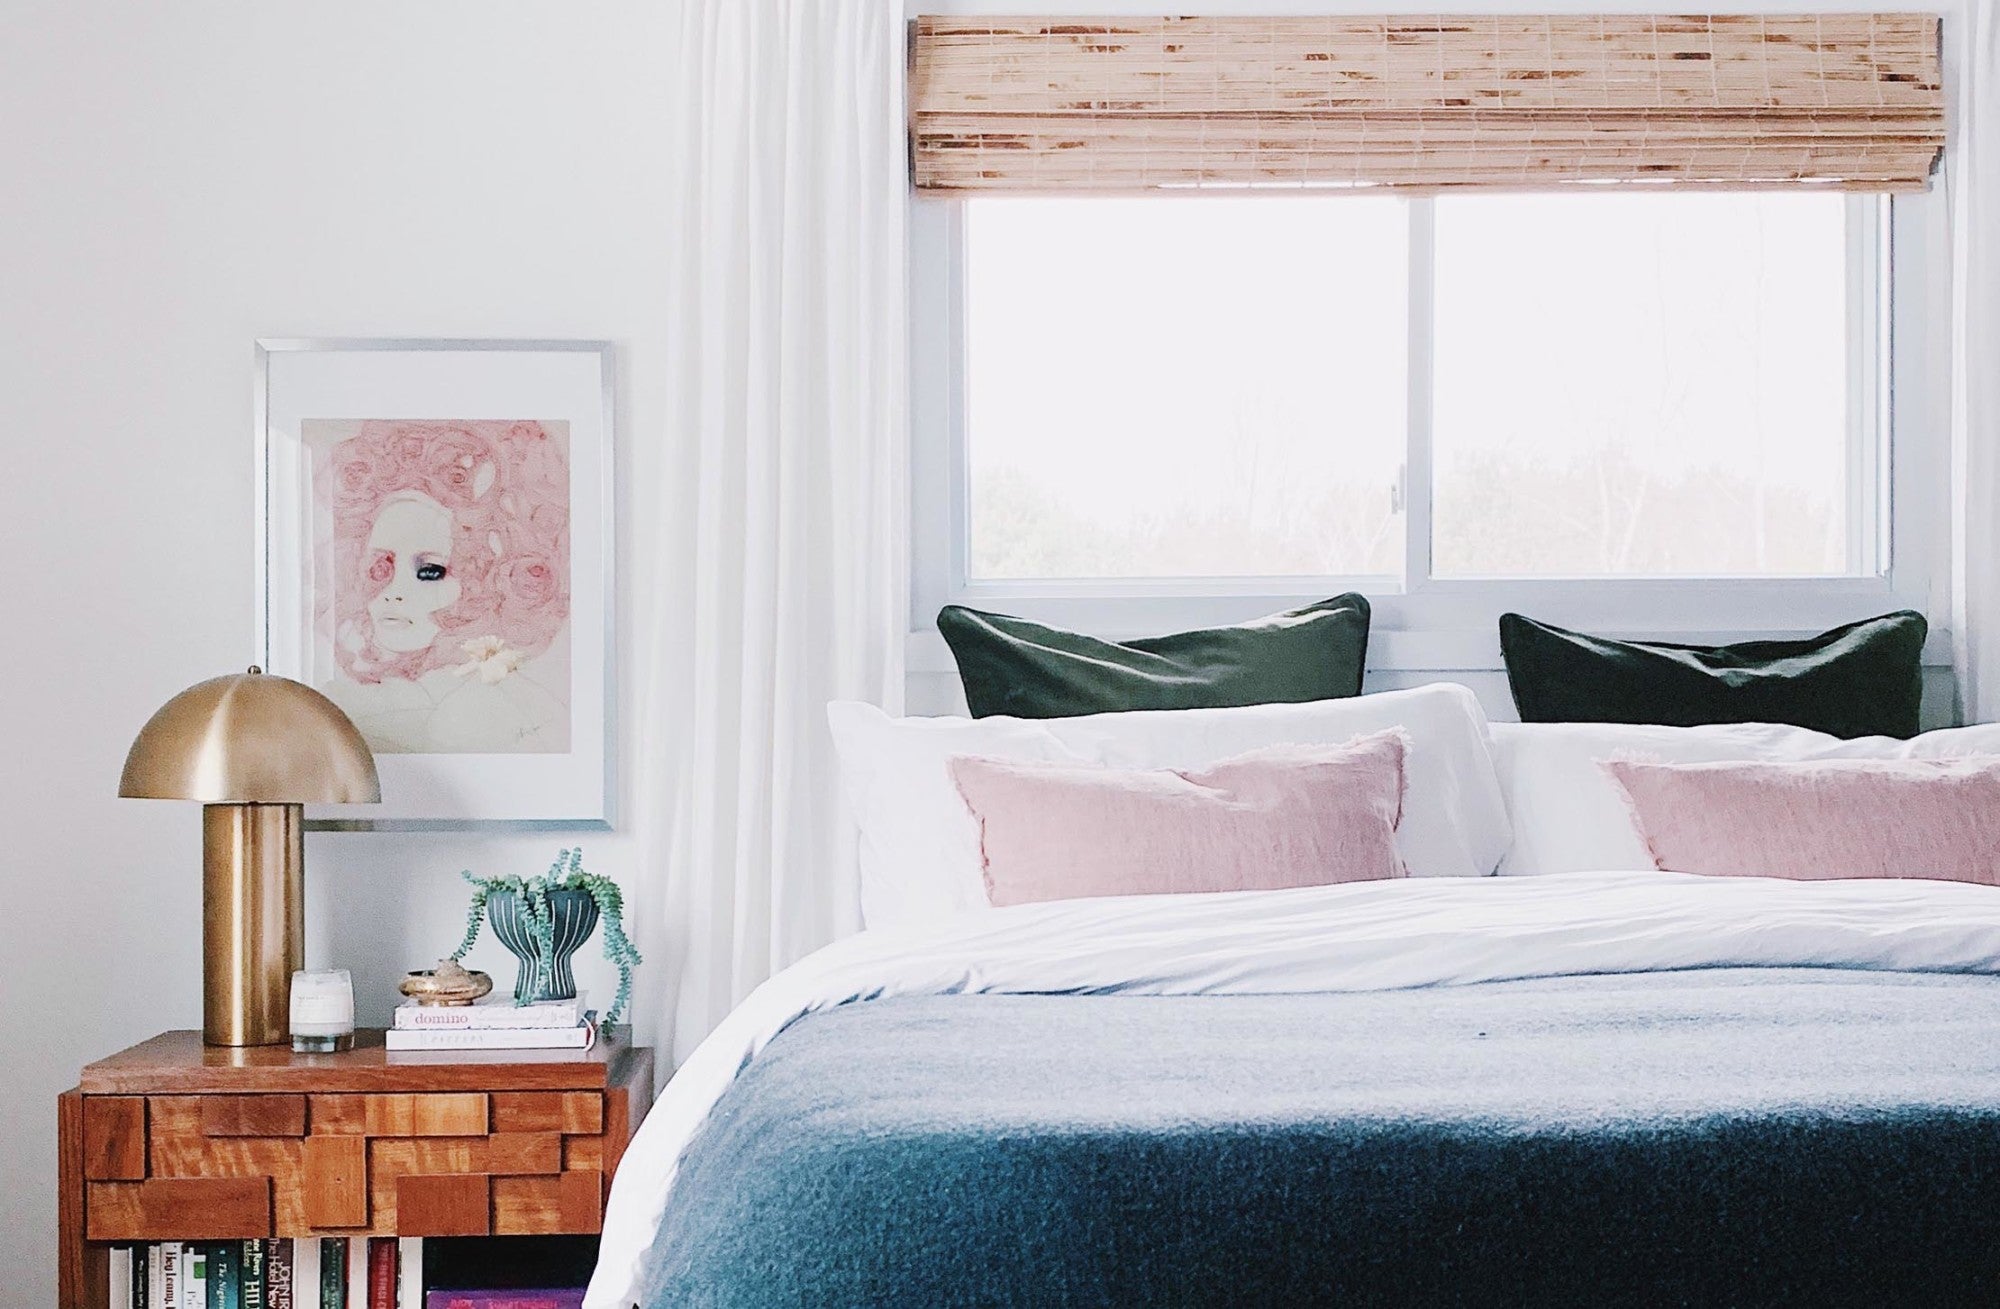 5 Of My Favourite Guest Bedroom Essentials - The Blush Home Blog